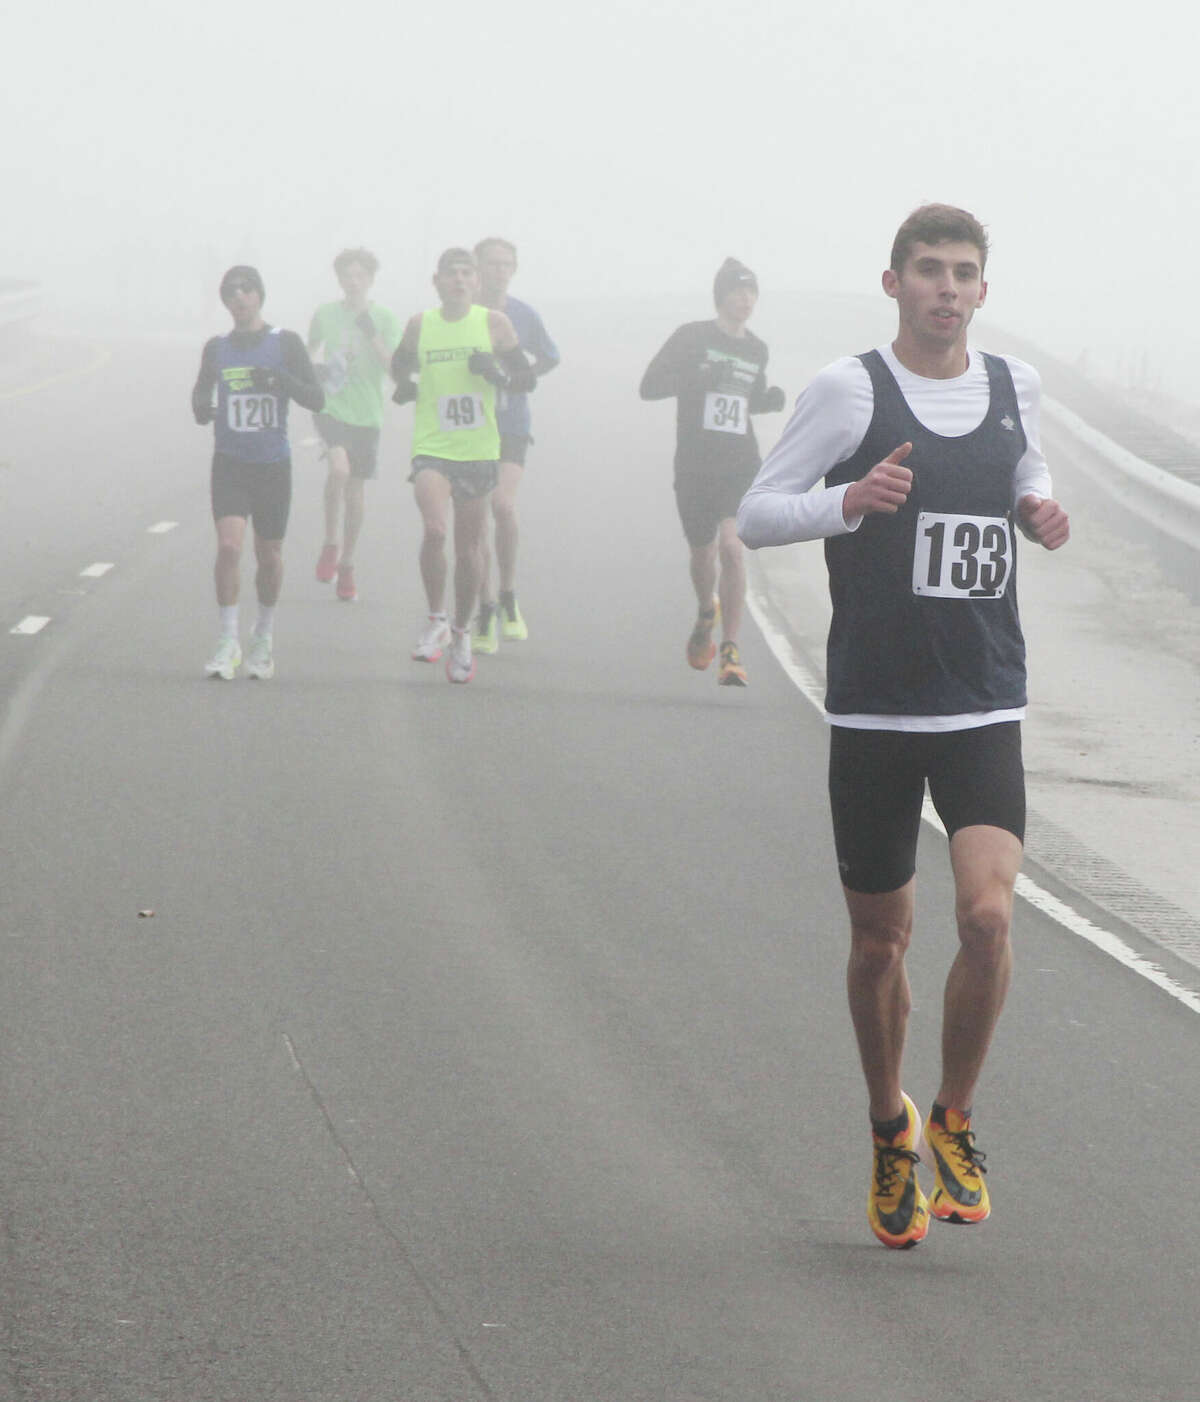 Evin Rathgeb (133), who placed 4th, comes out of the fog during the annual Great River Road Run, sponsored by the Alton Road Runner’s Club. About 360 people participated in the 10-mile and 5K runs, which were held under heavy fog coming off the river.